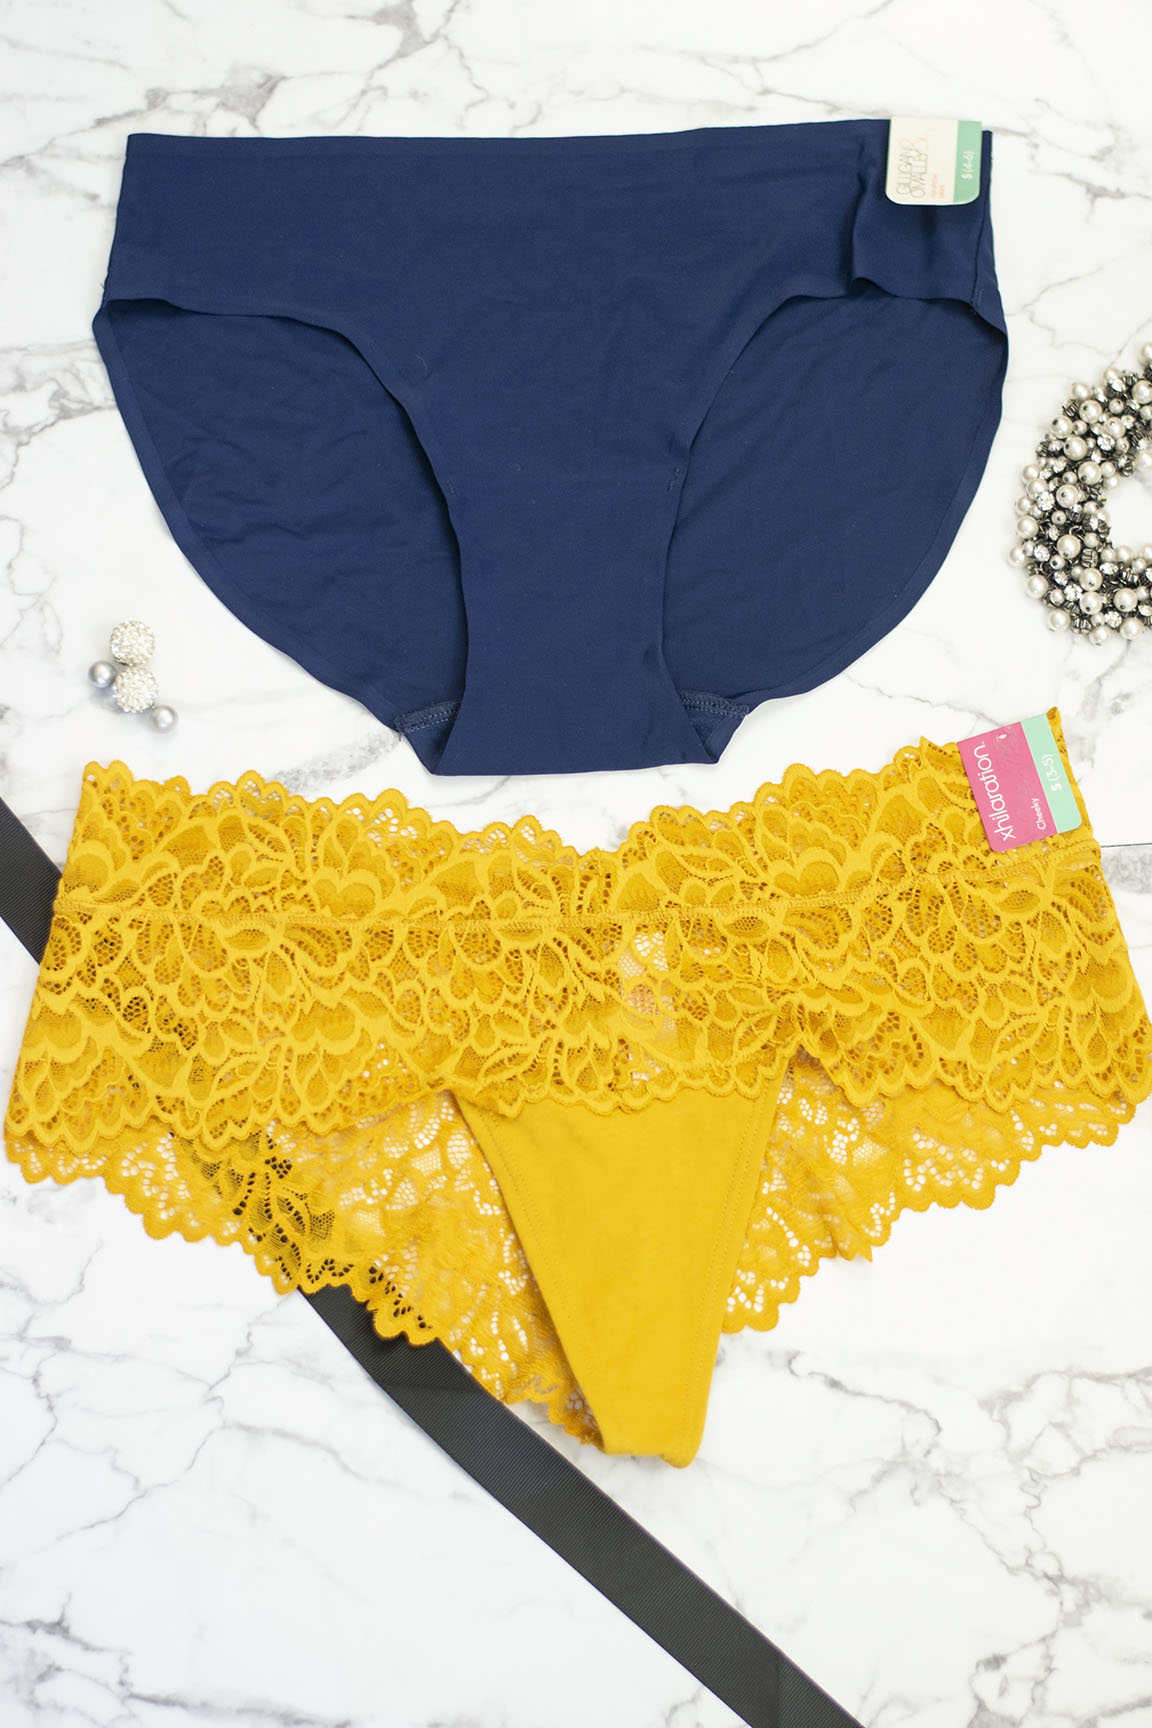 Two women's underwear in yellow and blue colour